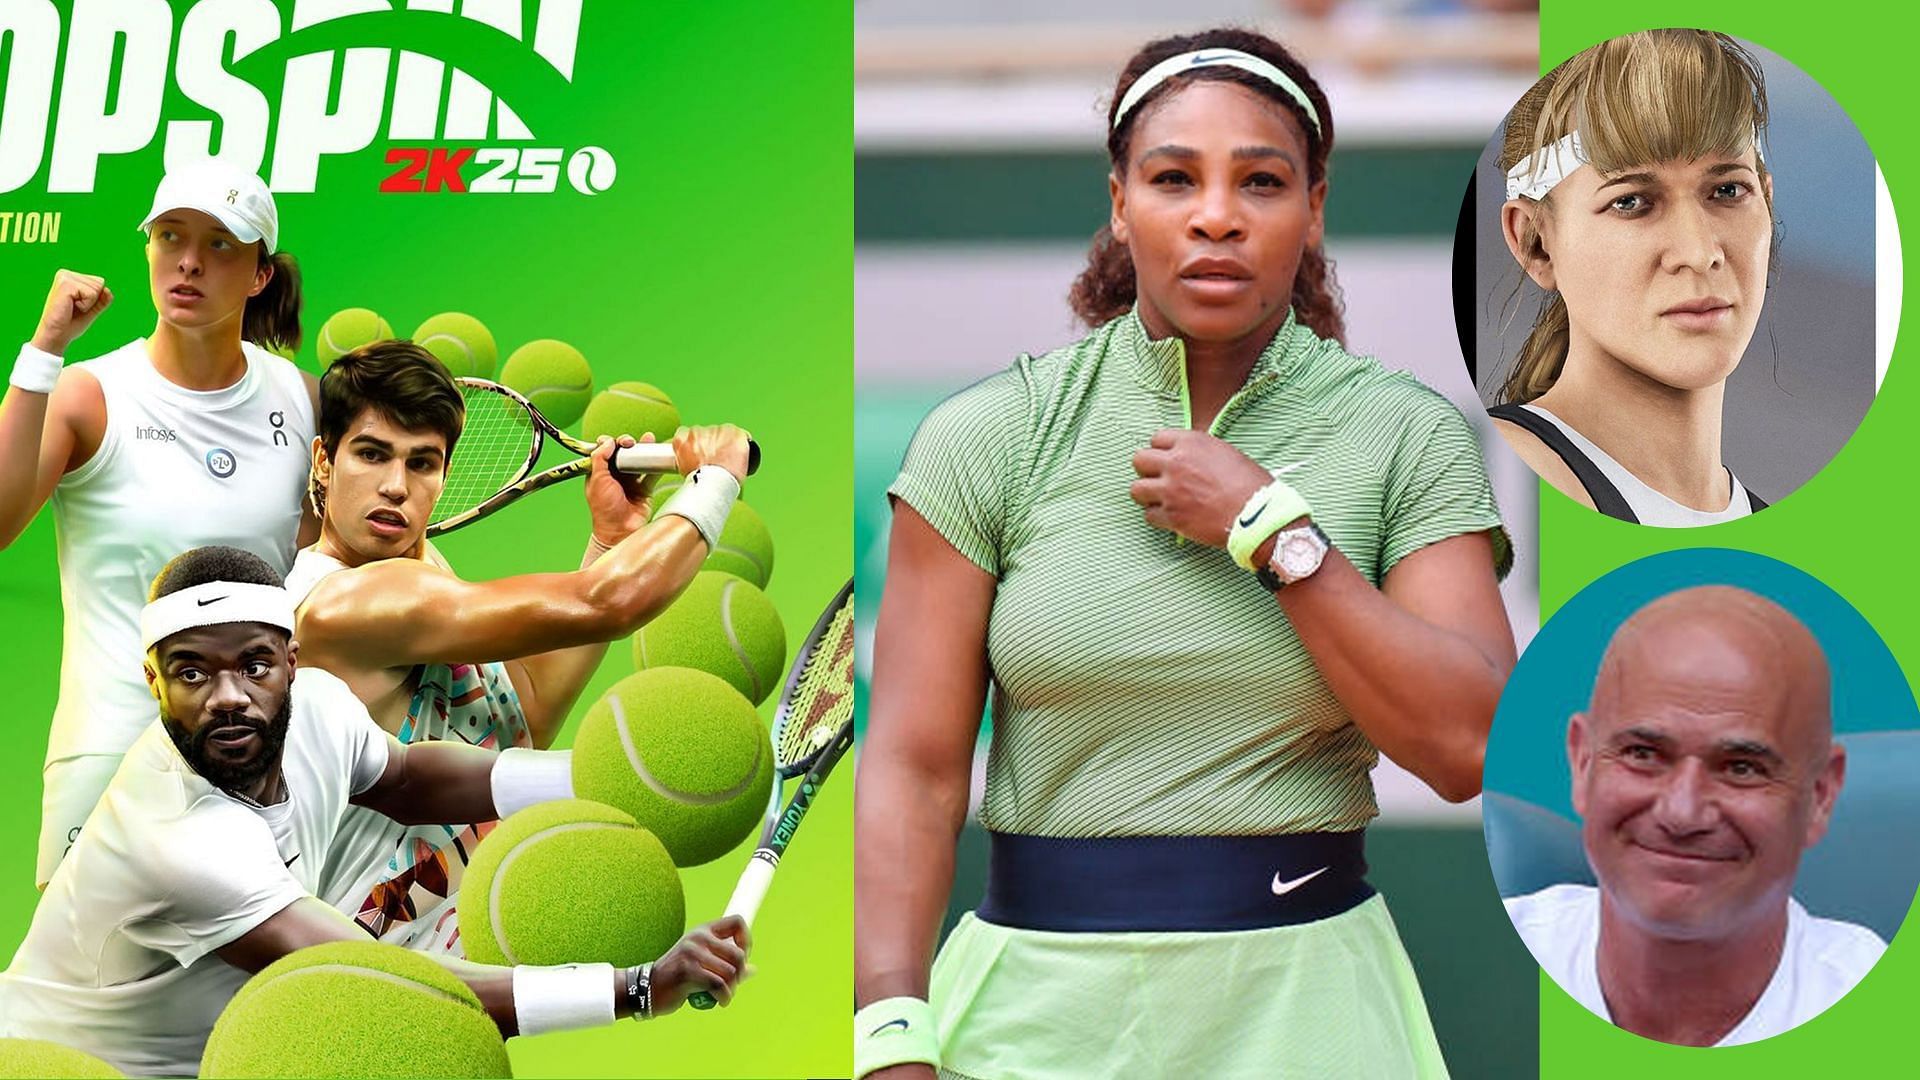 From Andre Agassi, Steffi Graf, Serena Williams to Carlos Alcaraz, Coco Gauff, Emma Raducanu: Complete list of playable characters in TopSpin 2k25